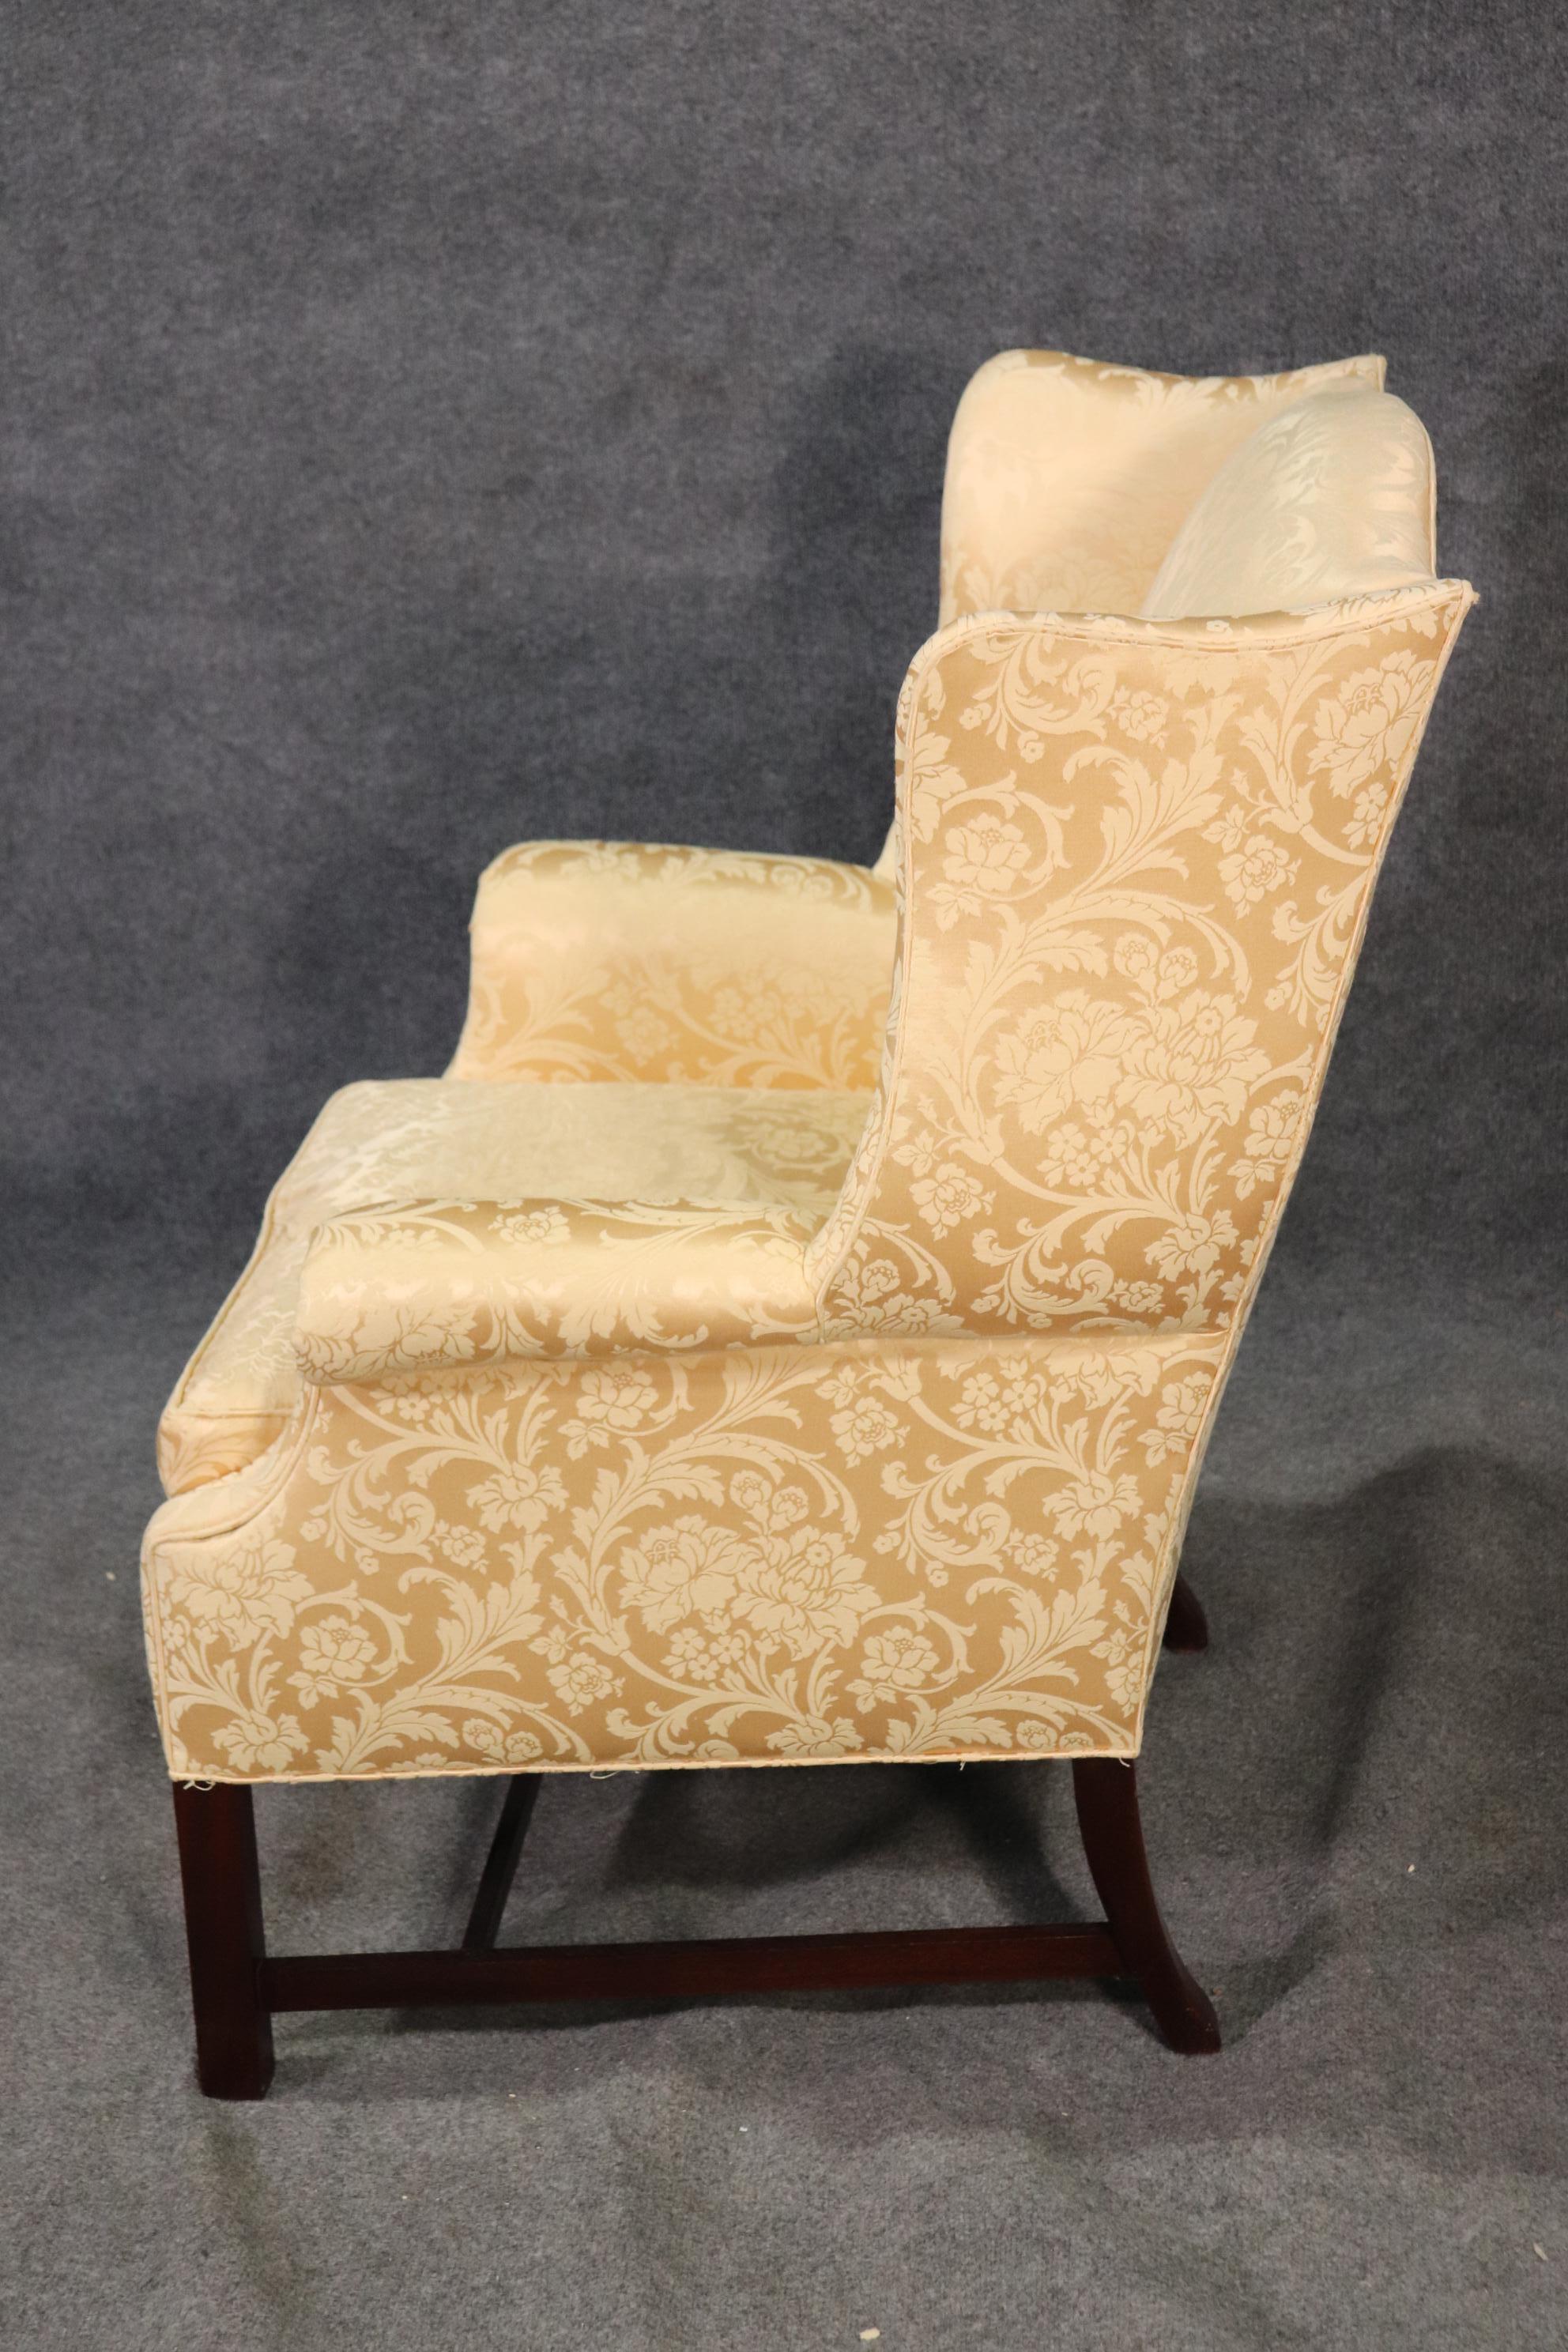 American Classical Newport Style Solid Mahogany Wing Chair by Hickory Chair Company